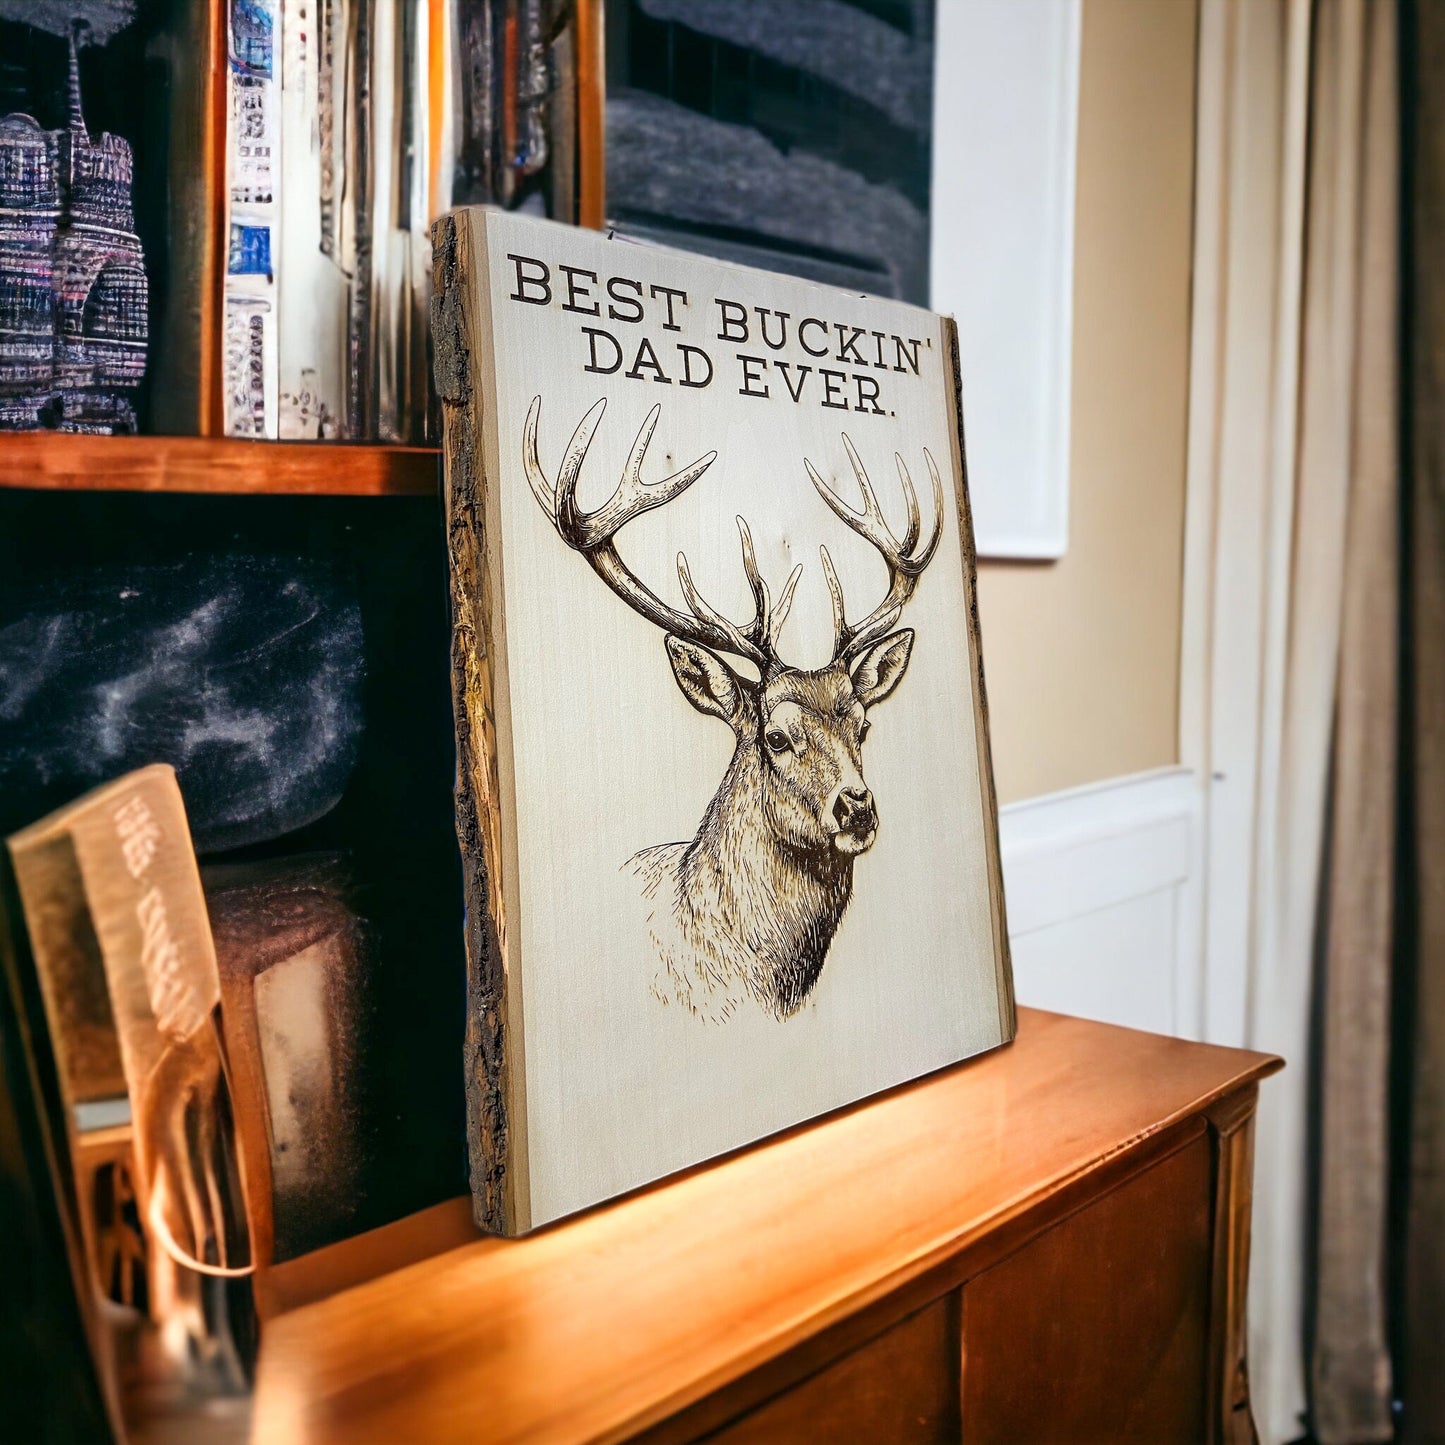 Best Dad Ever, Father's Day Sign, Gift for Dad, Father's Day Gift, Deer Sign, Best Buckin Dad Ever, Hunting Dad Gift, Dad Hunting Sign